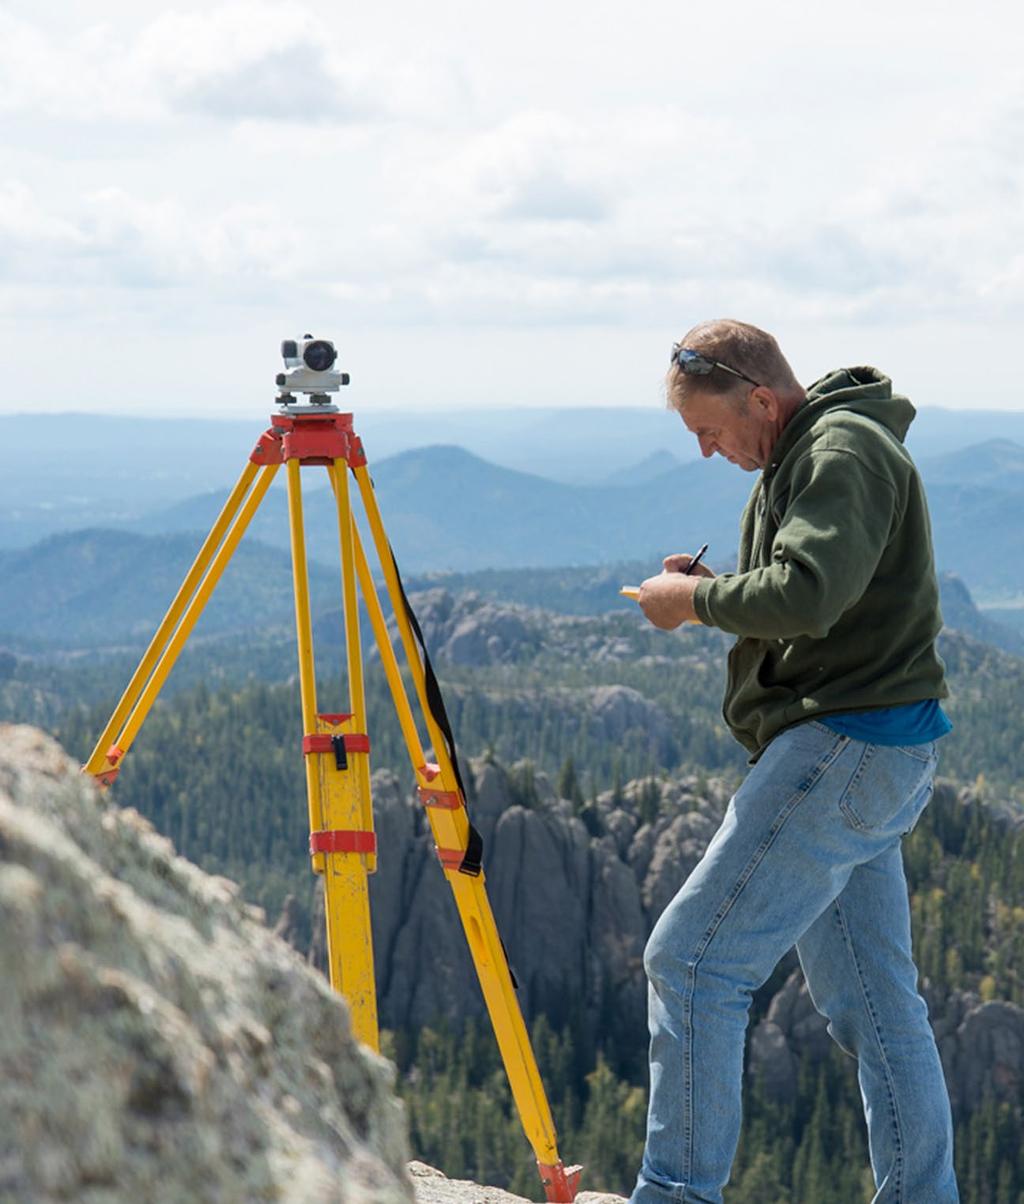 With a Sokkia B-1 level precariously set up near the lookout tower, Jerry Penry records the reading to the nearby points.